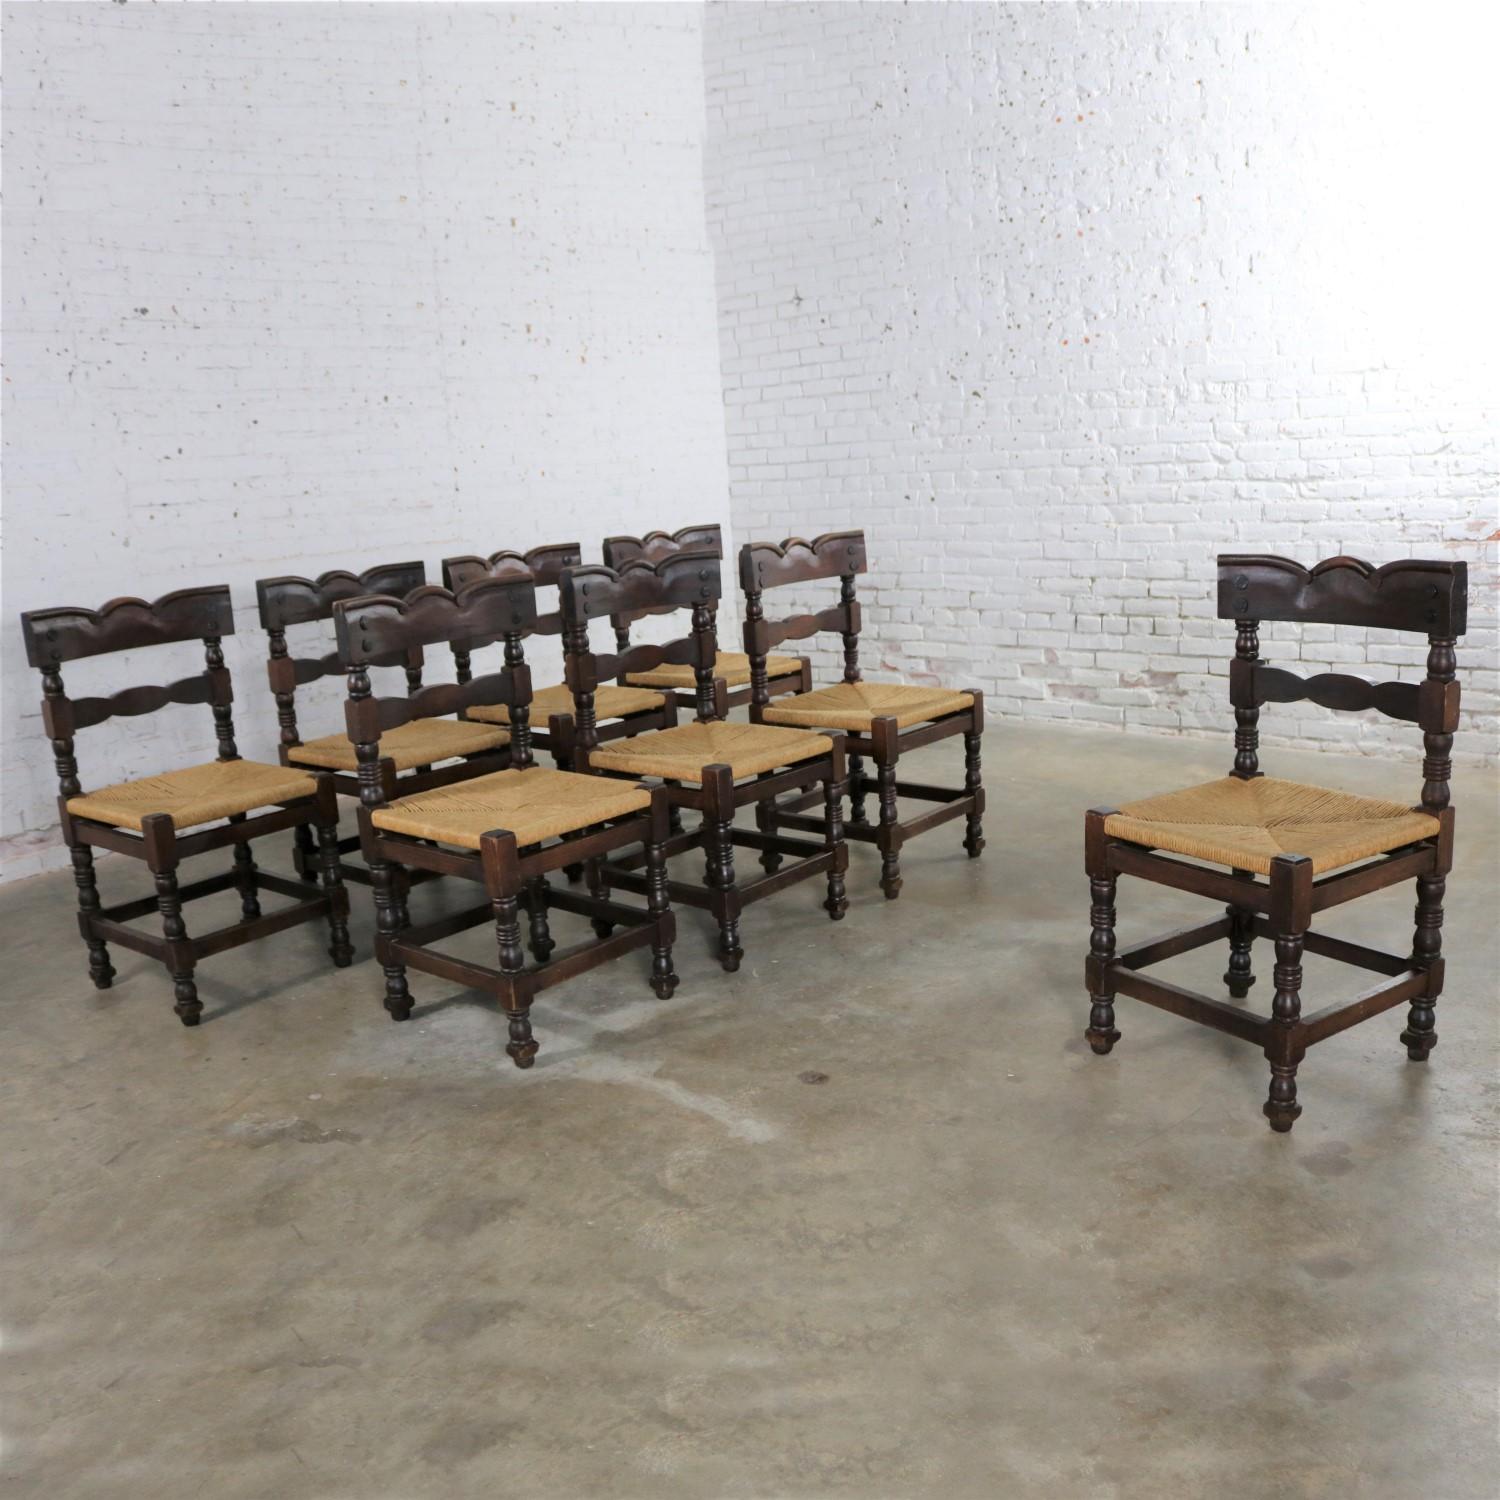 Spanish Colonial 4 Colonial Style Dining Chairs with Rush Seats Stamped Hecho en Mexico